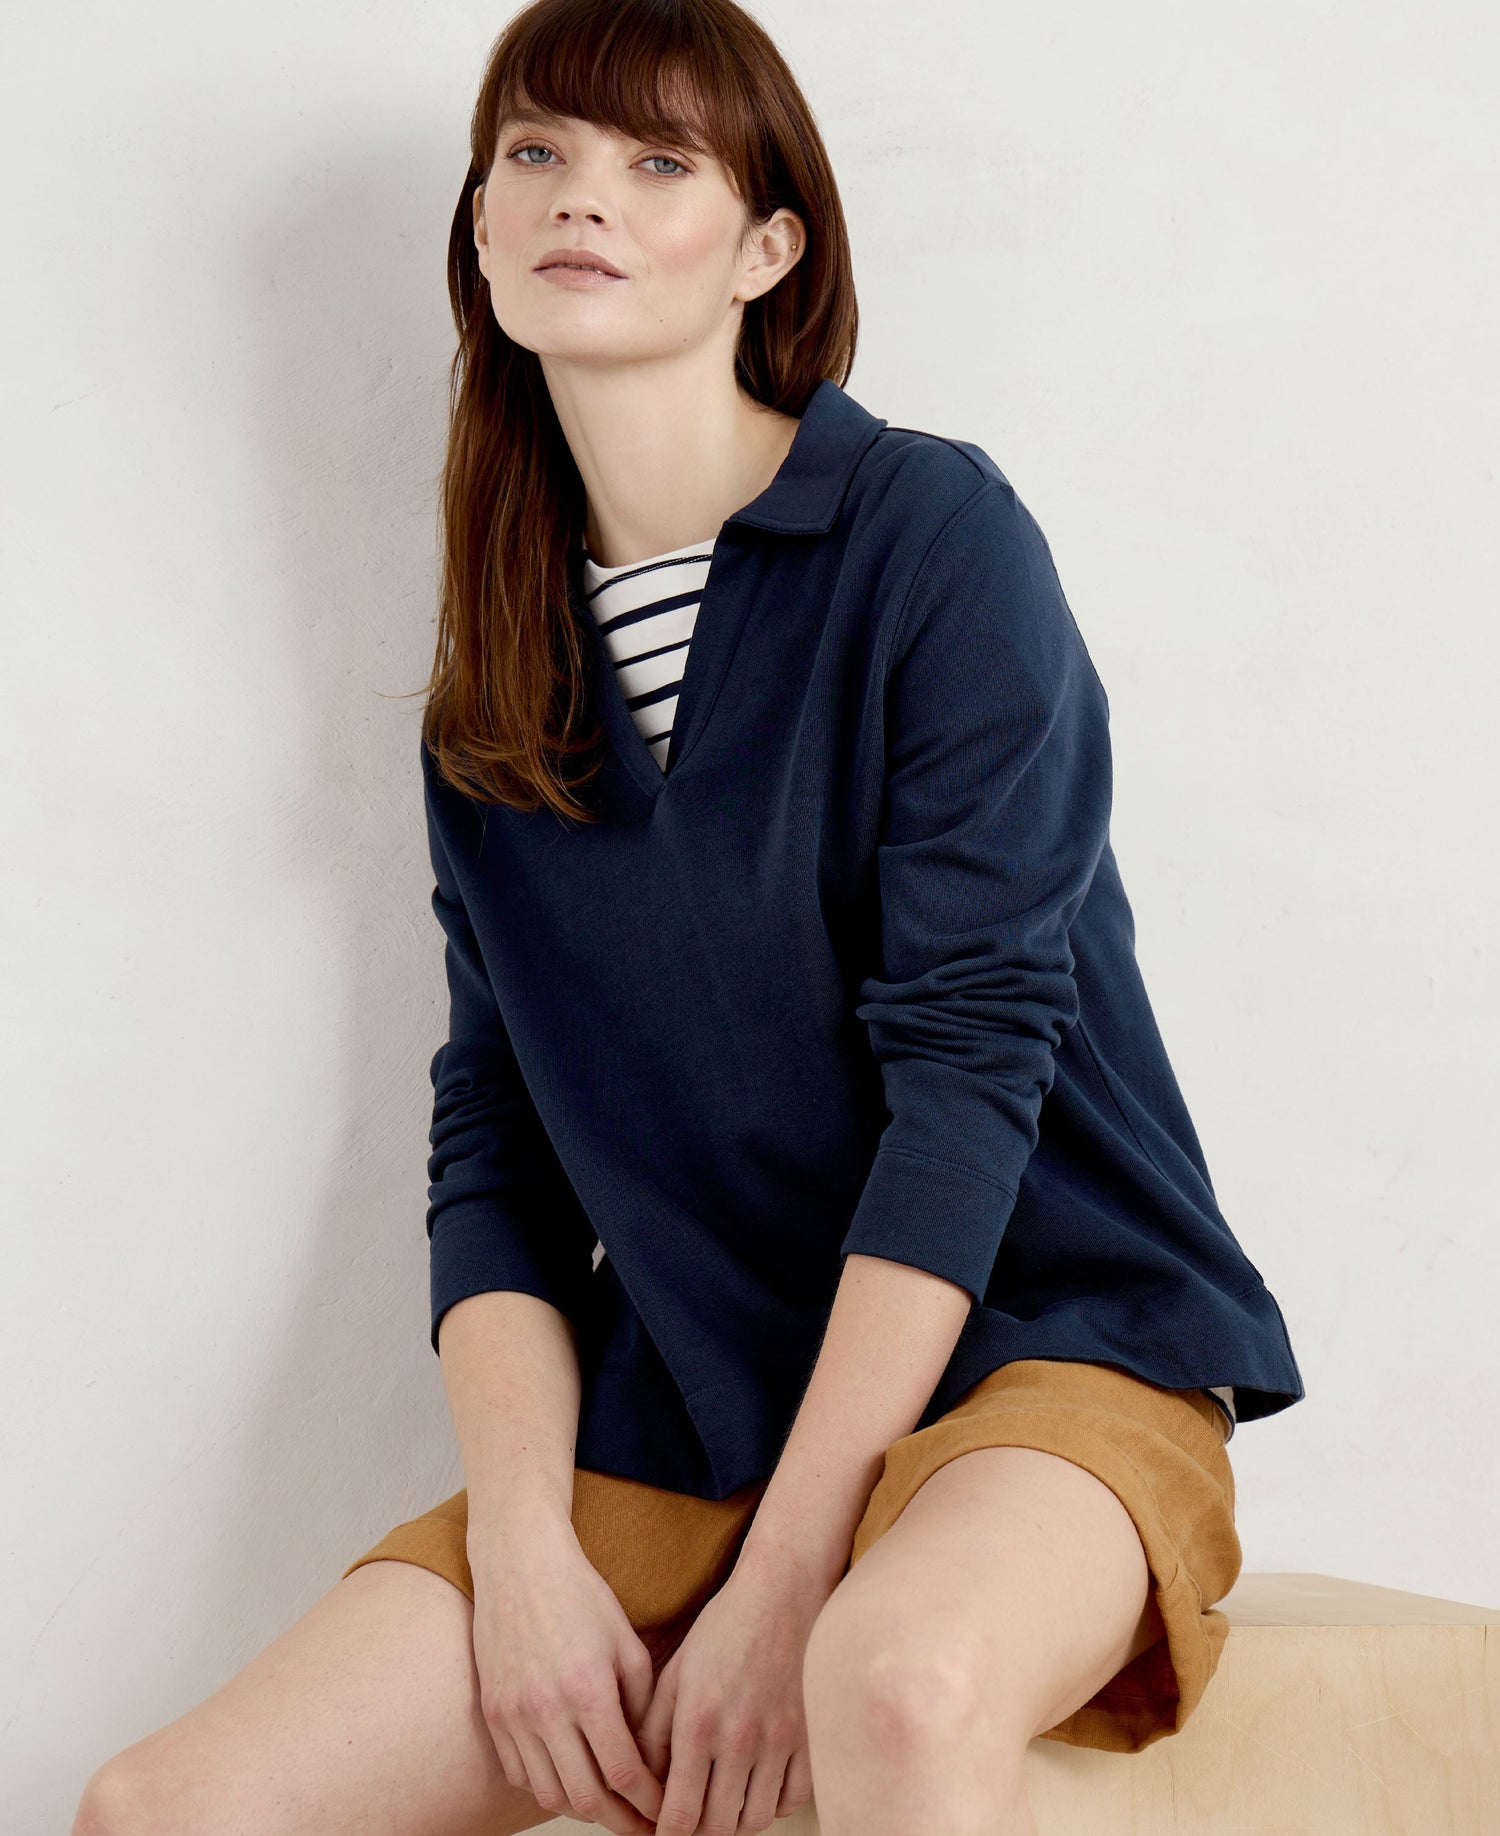 Clear Wing V-Neck Collared Sweatshirt - Maritime